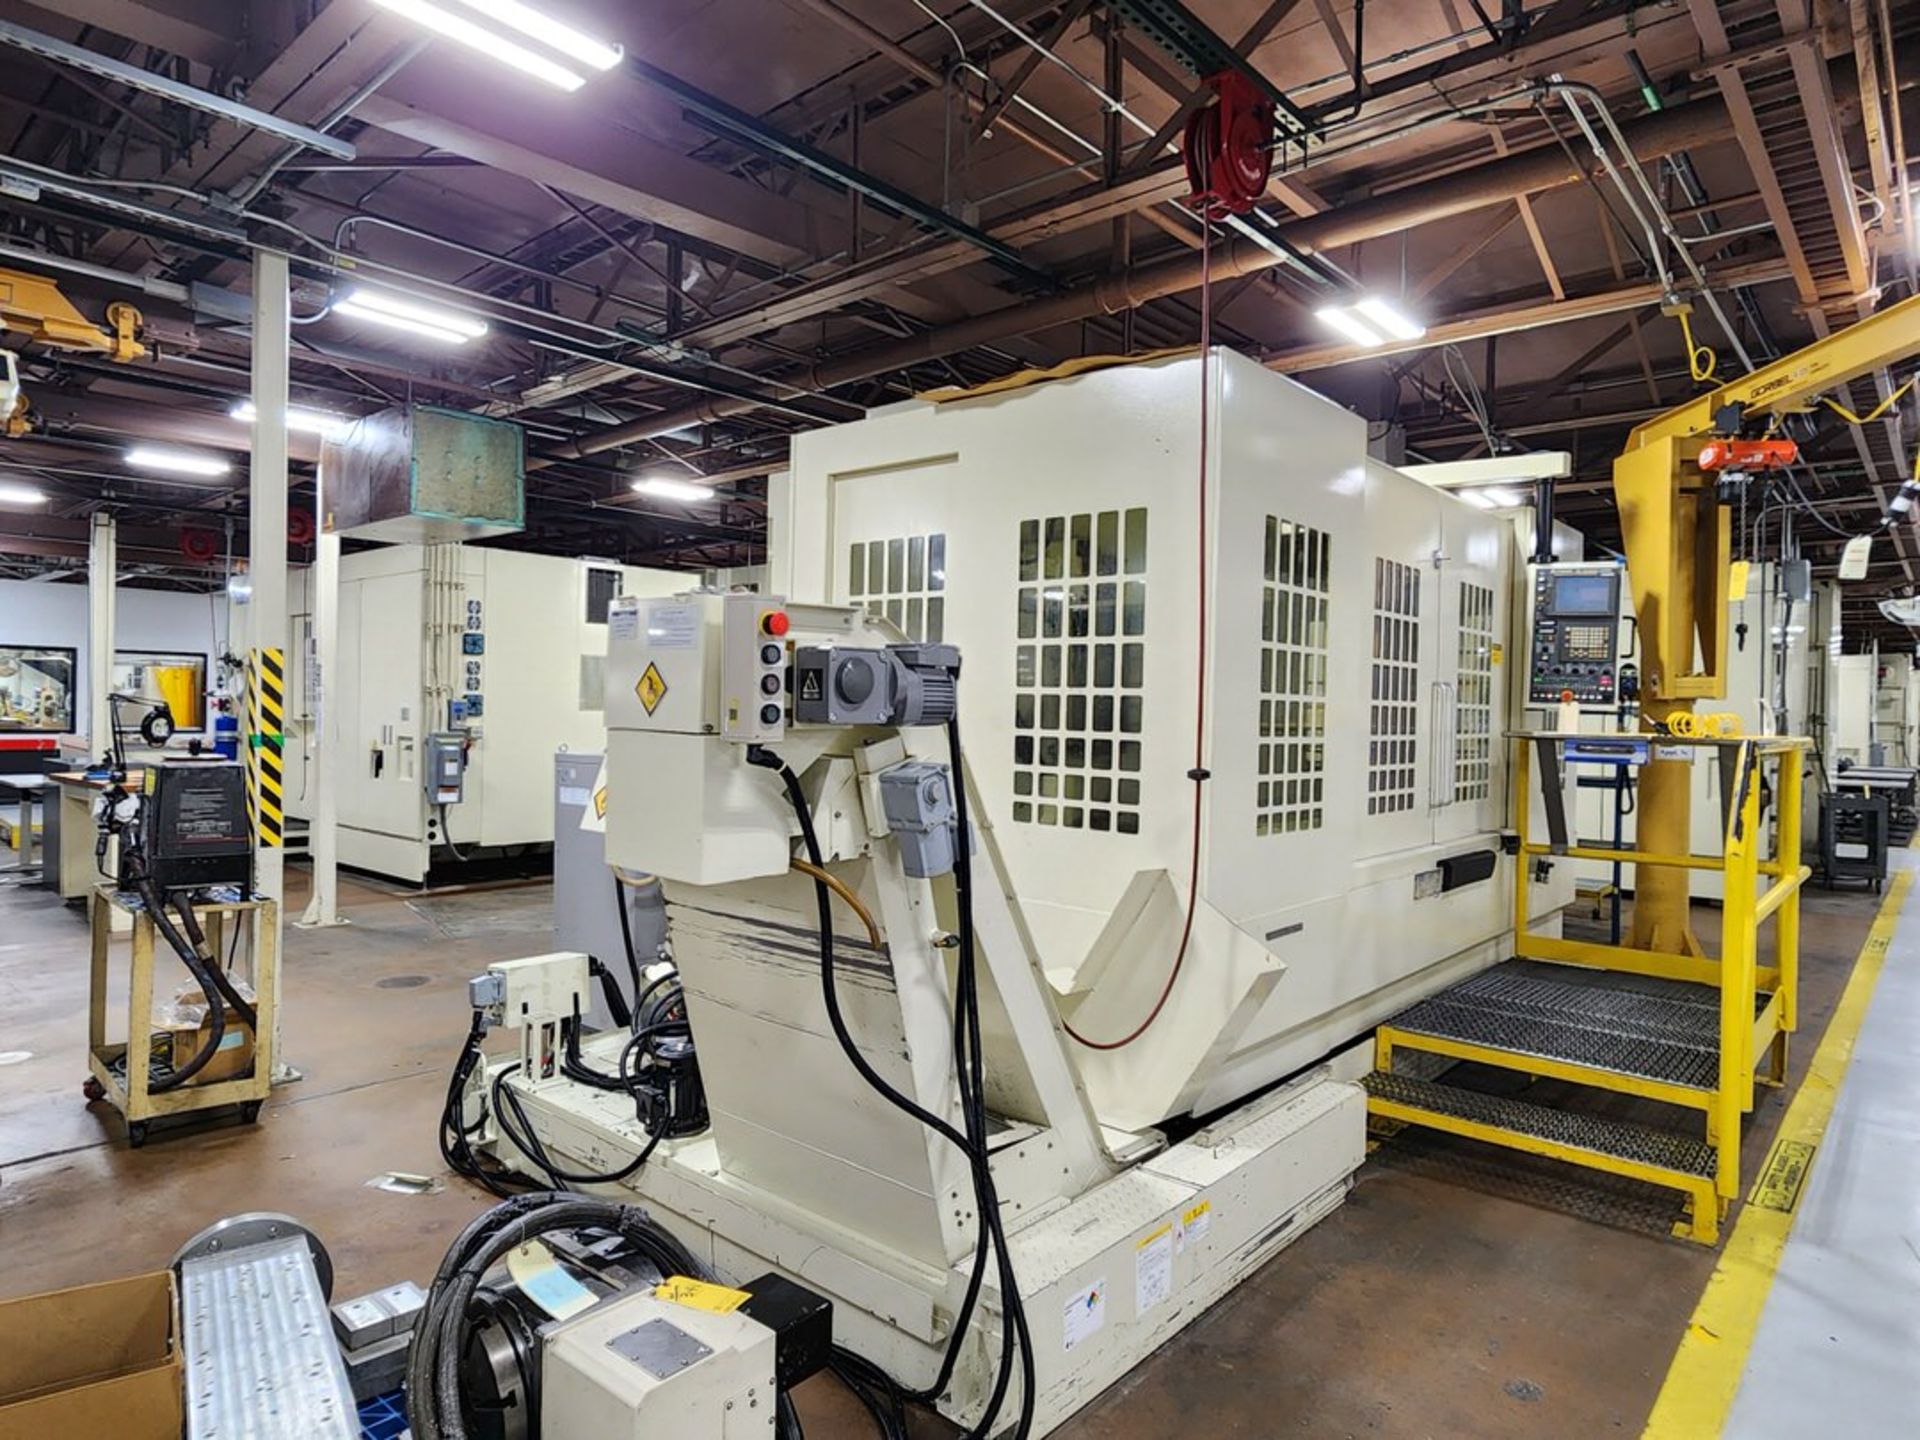 2008 Kitamura 7HiF Vertical Machining Center W/ Fanuc Series 16i-MB; 30,000 Spindle Speed; - Image 11 of 23